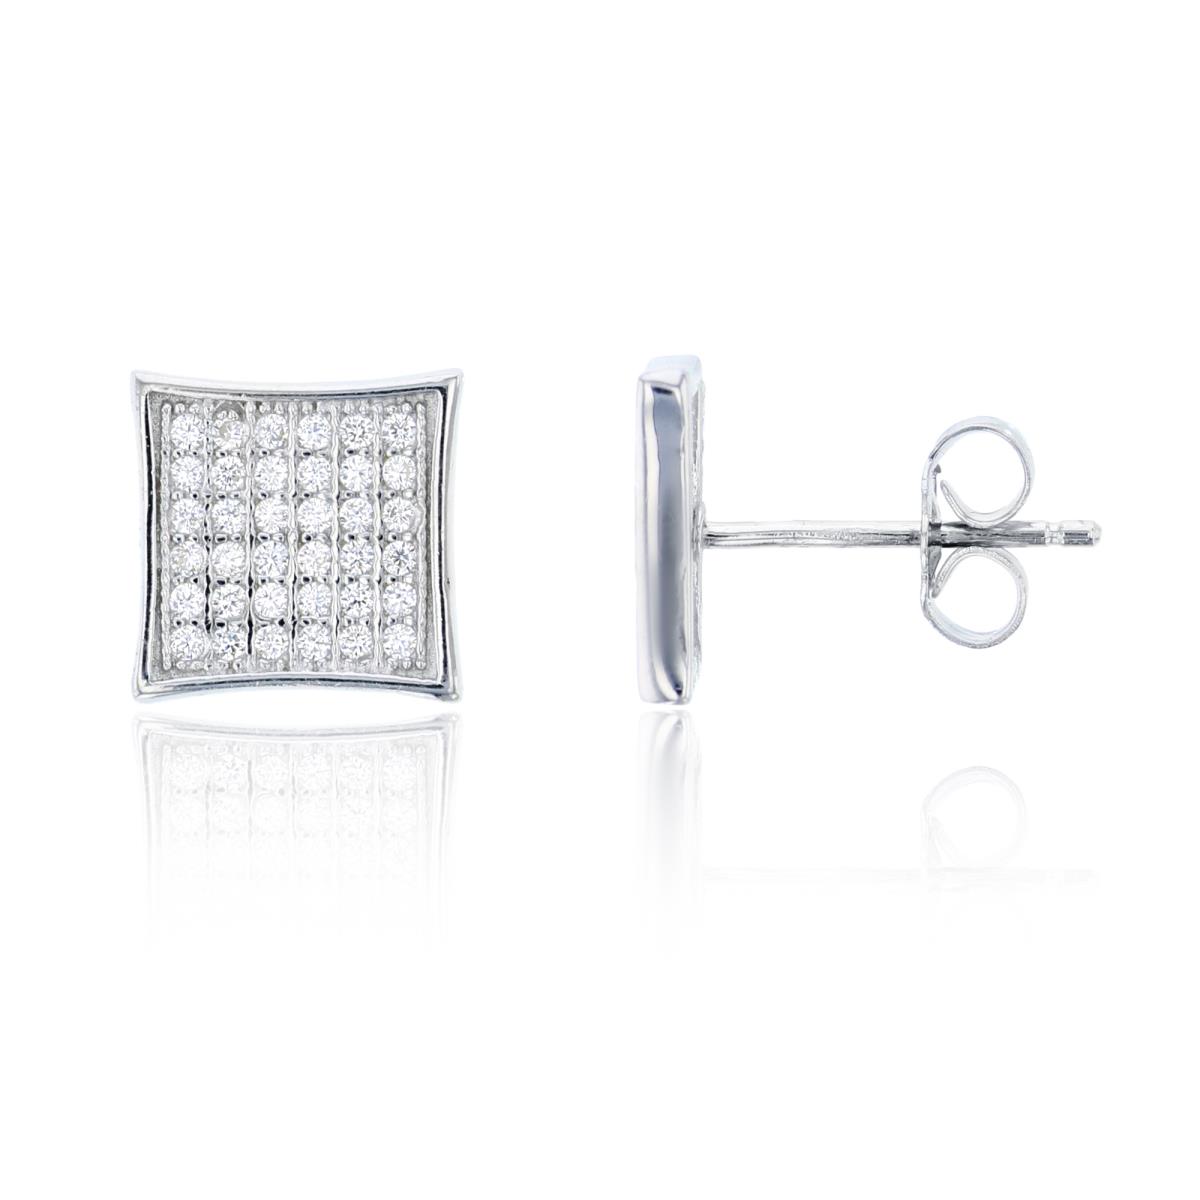 Sterling Silver 6x6mm Curved Square Stud Earring